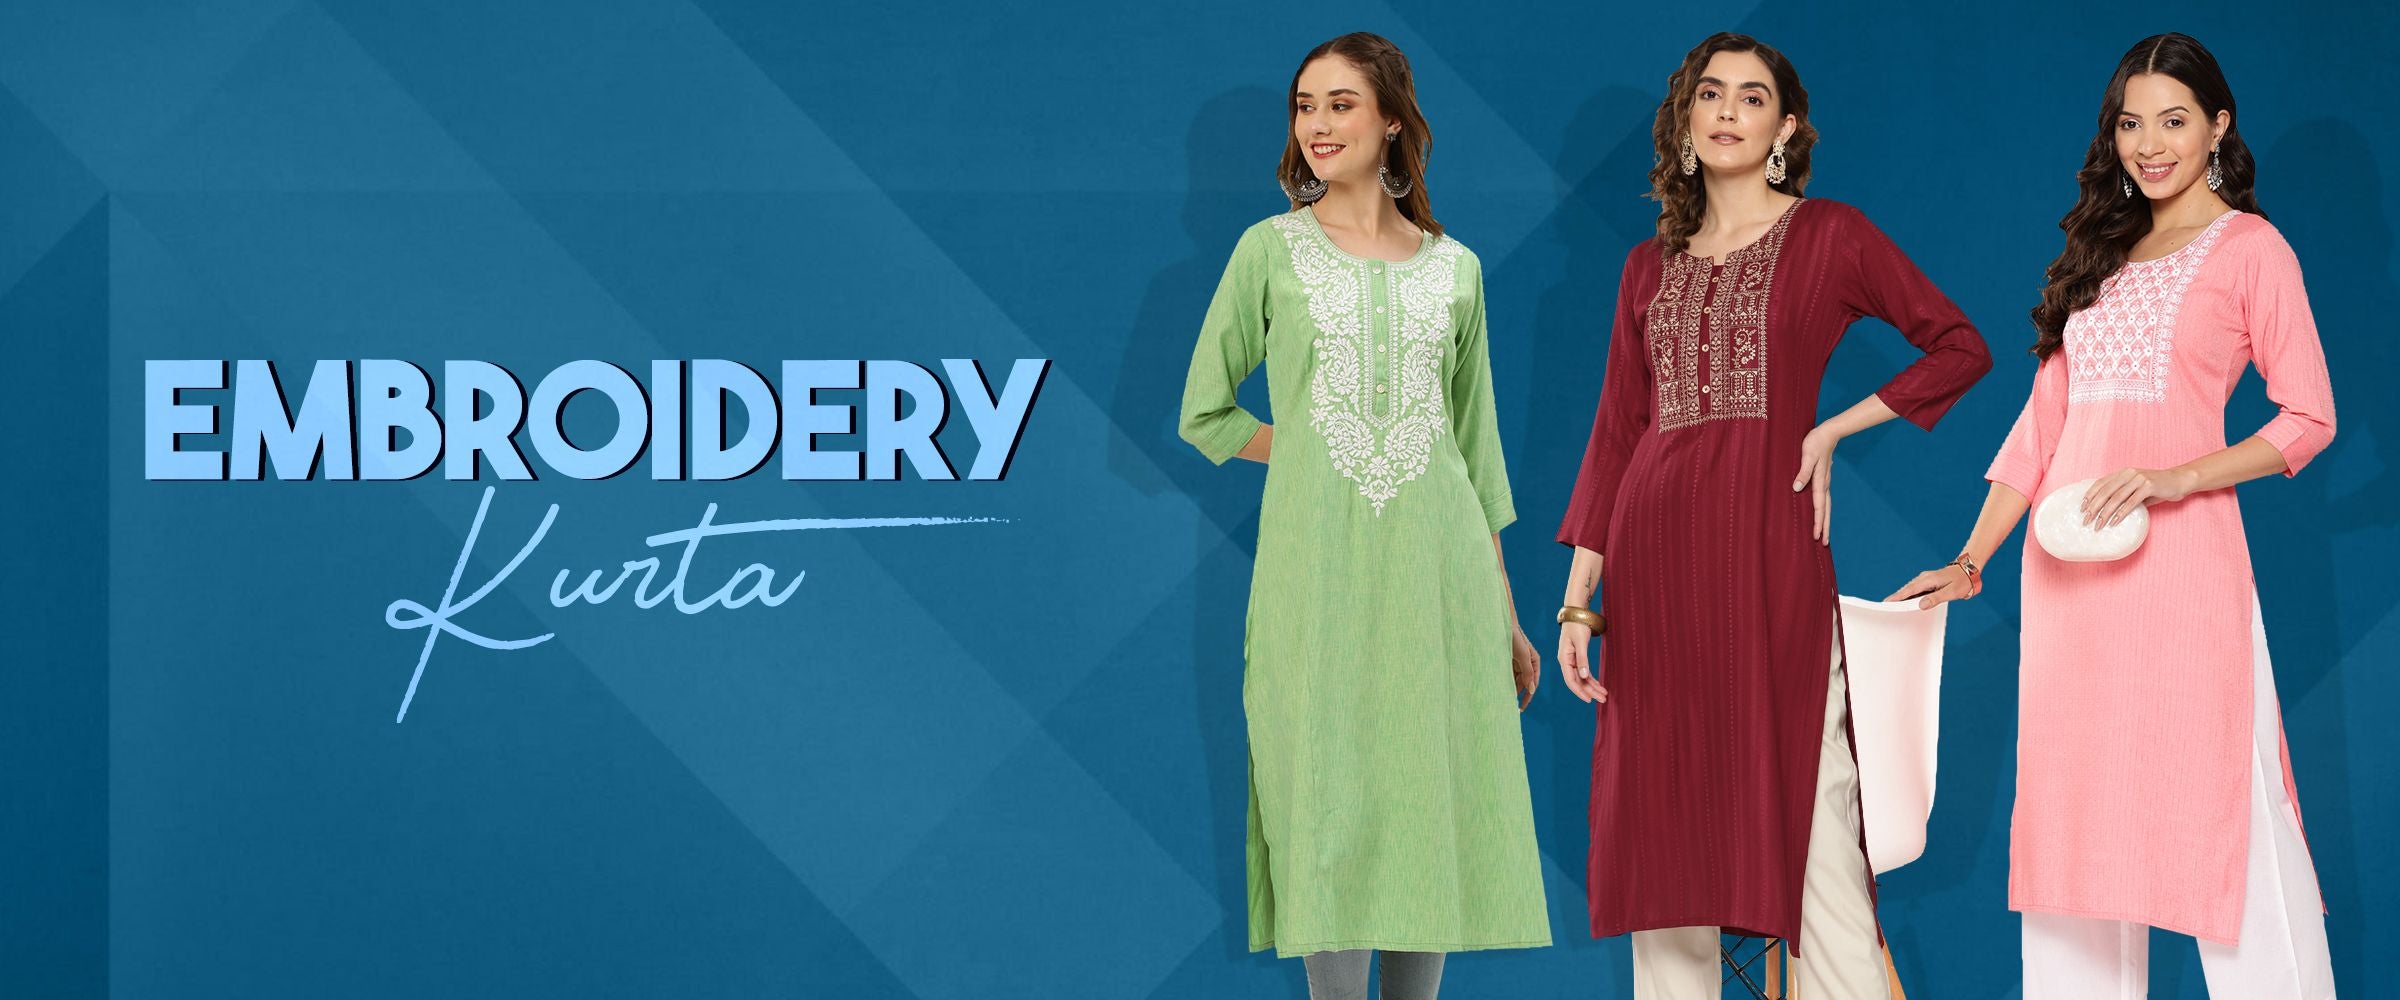 Heading For Party? Style With The 13 Best White Embroidery Kurti